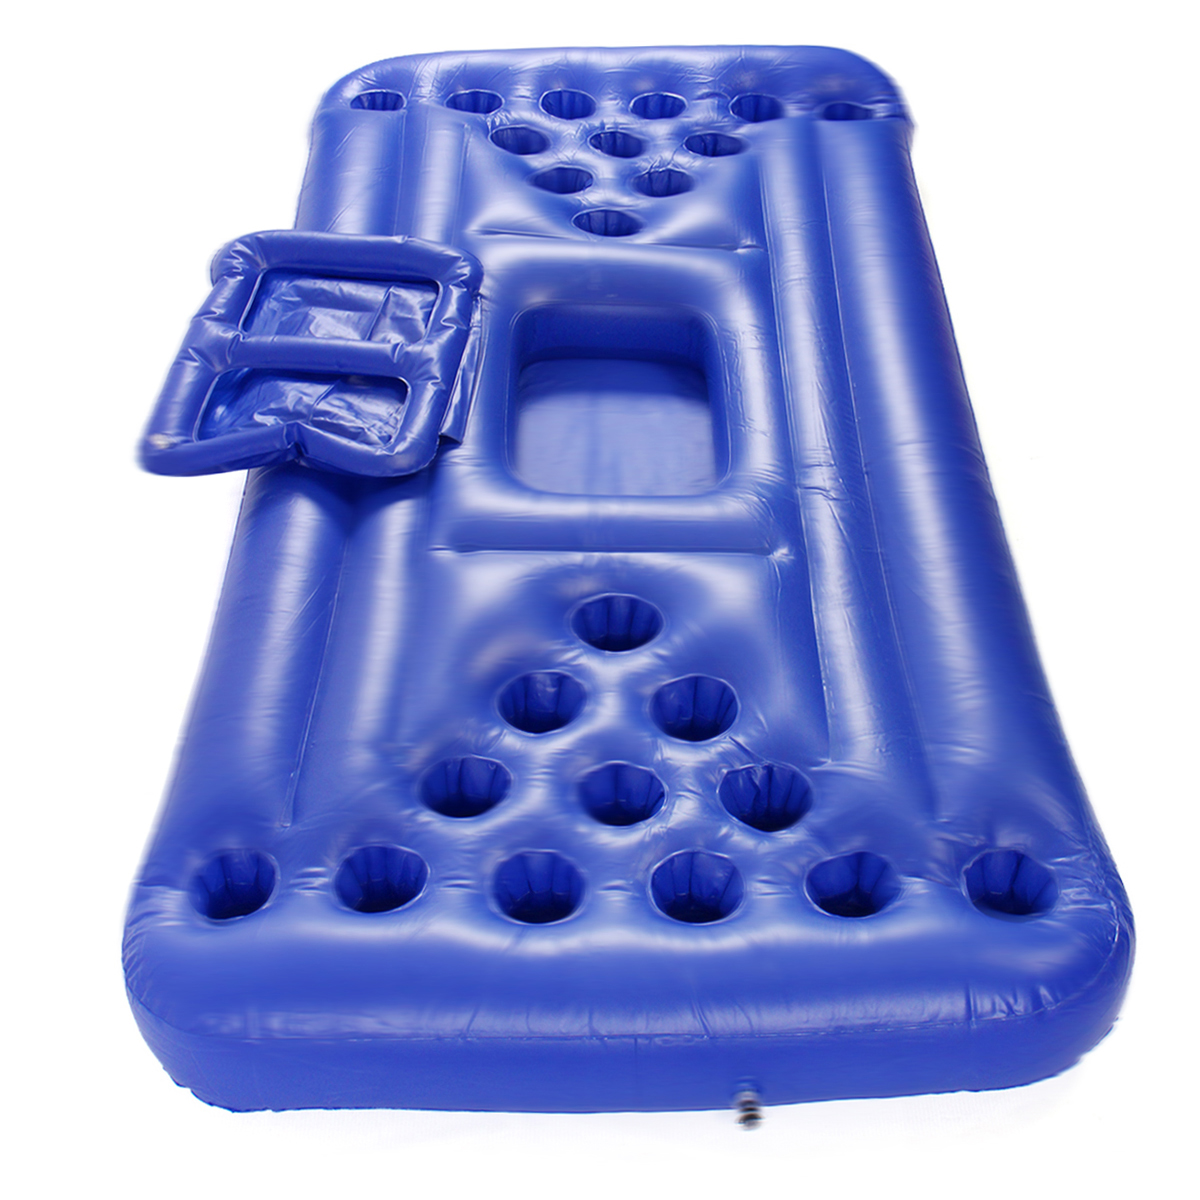 24-Holder-Inflatable-Beer-Pong-Ball-Table-Water-Floating-Raft-Lounge-Swim-Pool-Party-Game-1257106